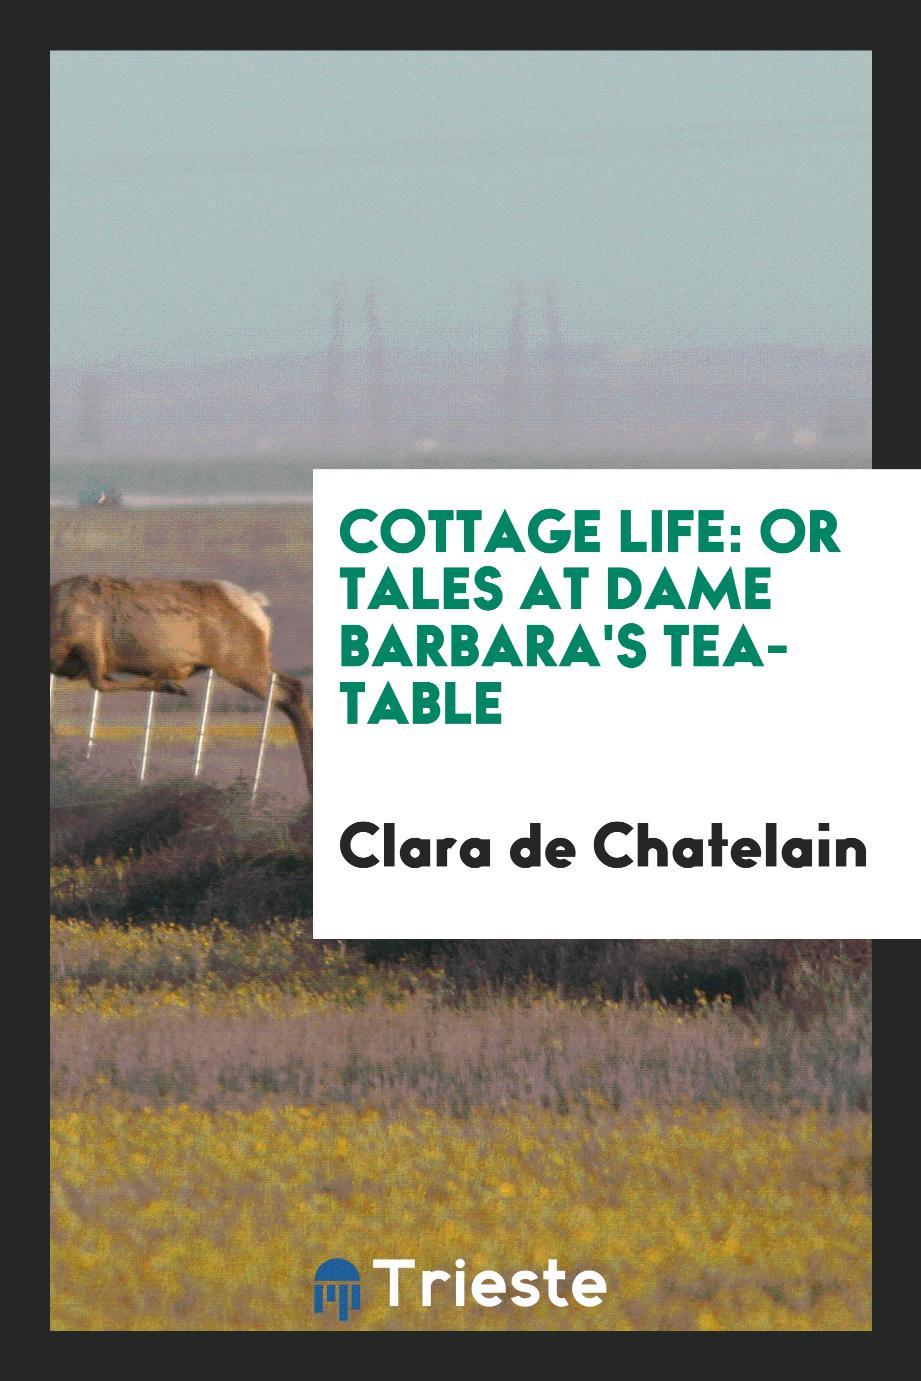 Cottage Life: Or Tales at Dame Barbara's Tea-Table